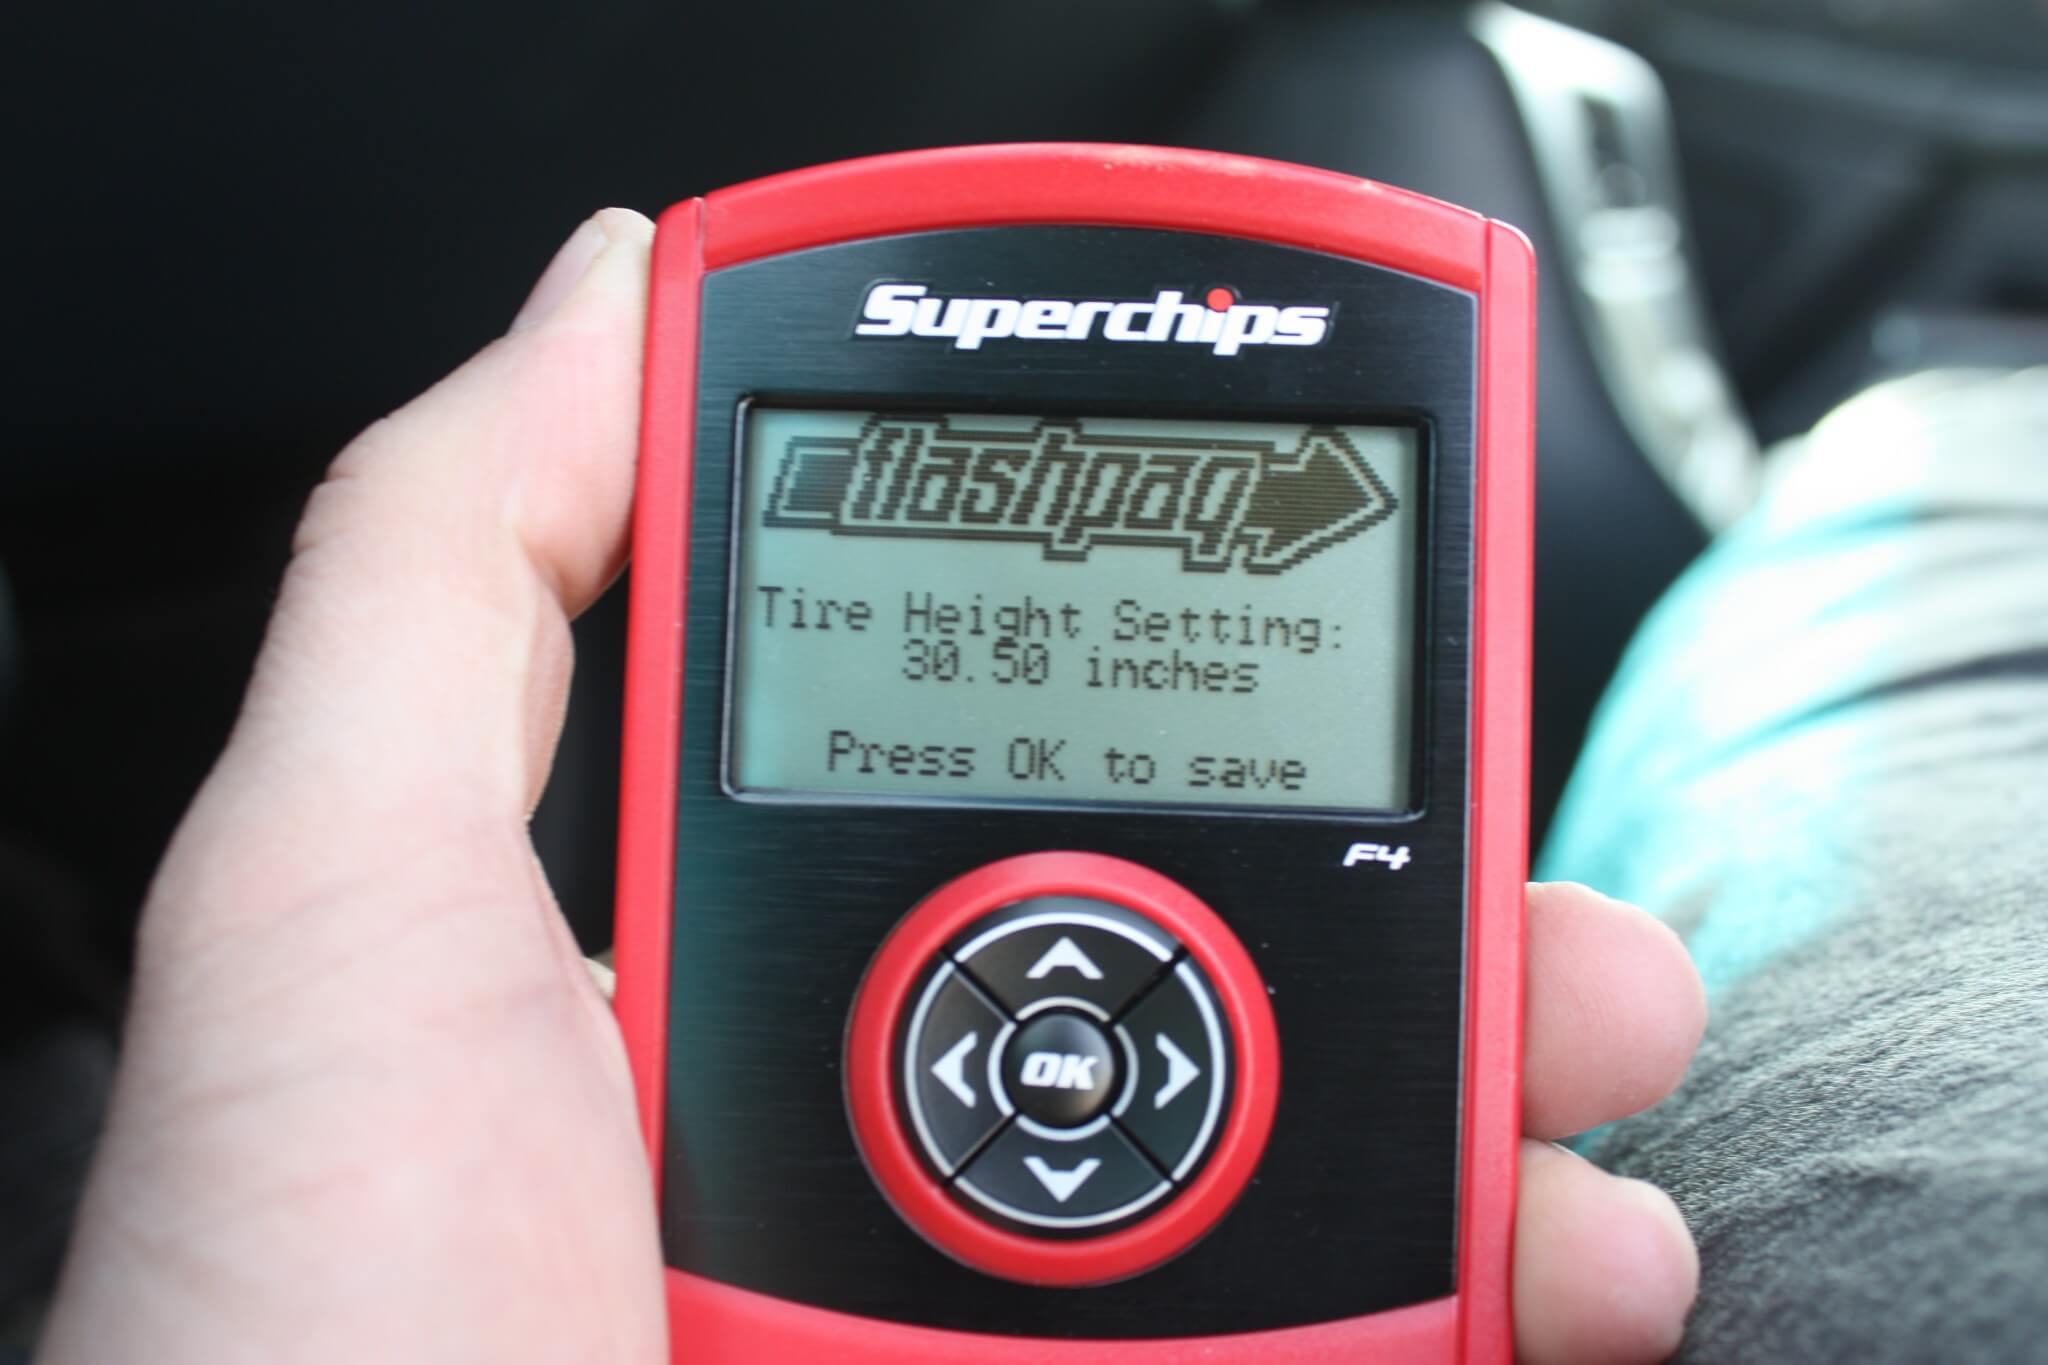 14. The Flashpaq tuner will even allow for calibration of the tire diameter, within a given range. Just plug in your tire diameter and your speedo will read correctly, even with a tire diameter change.